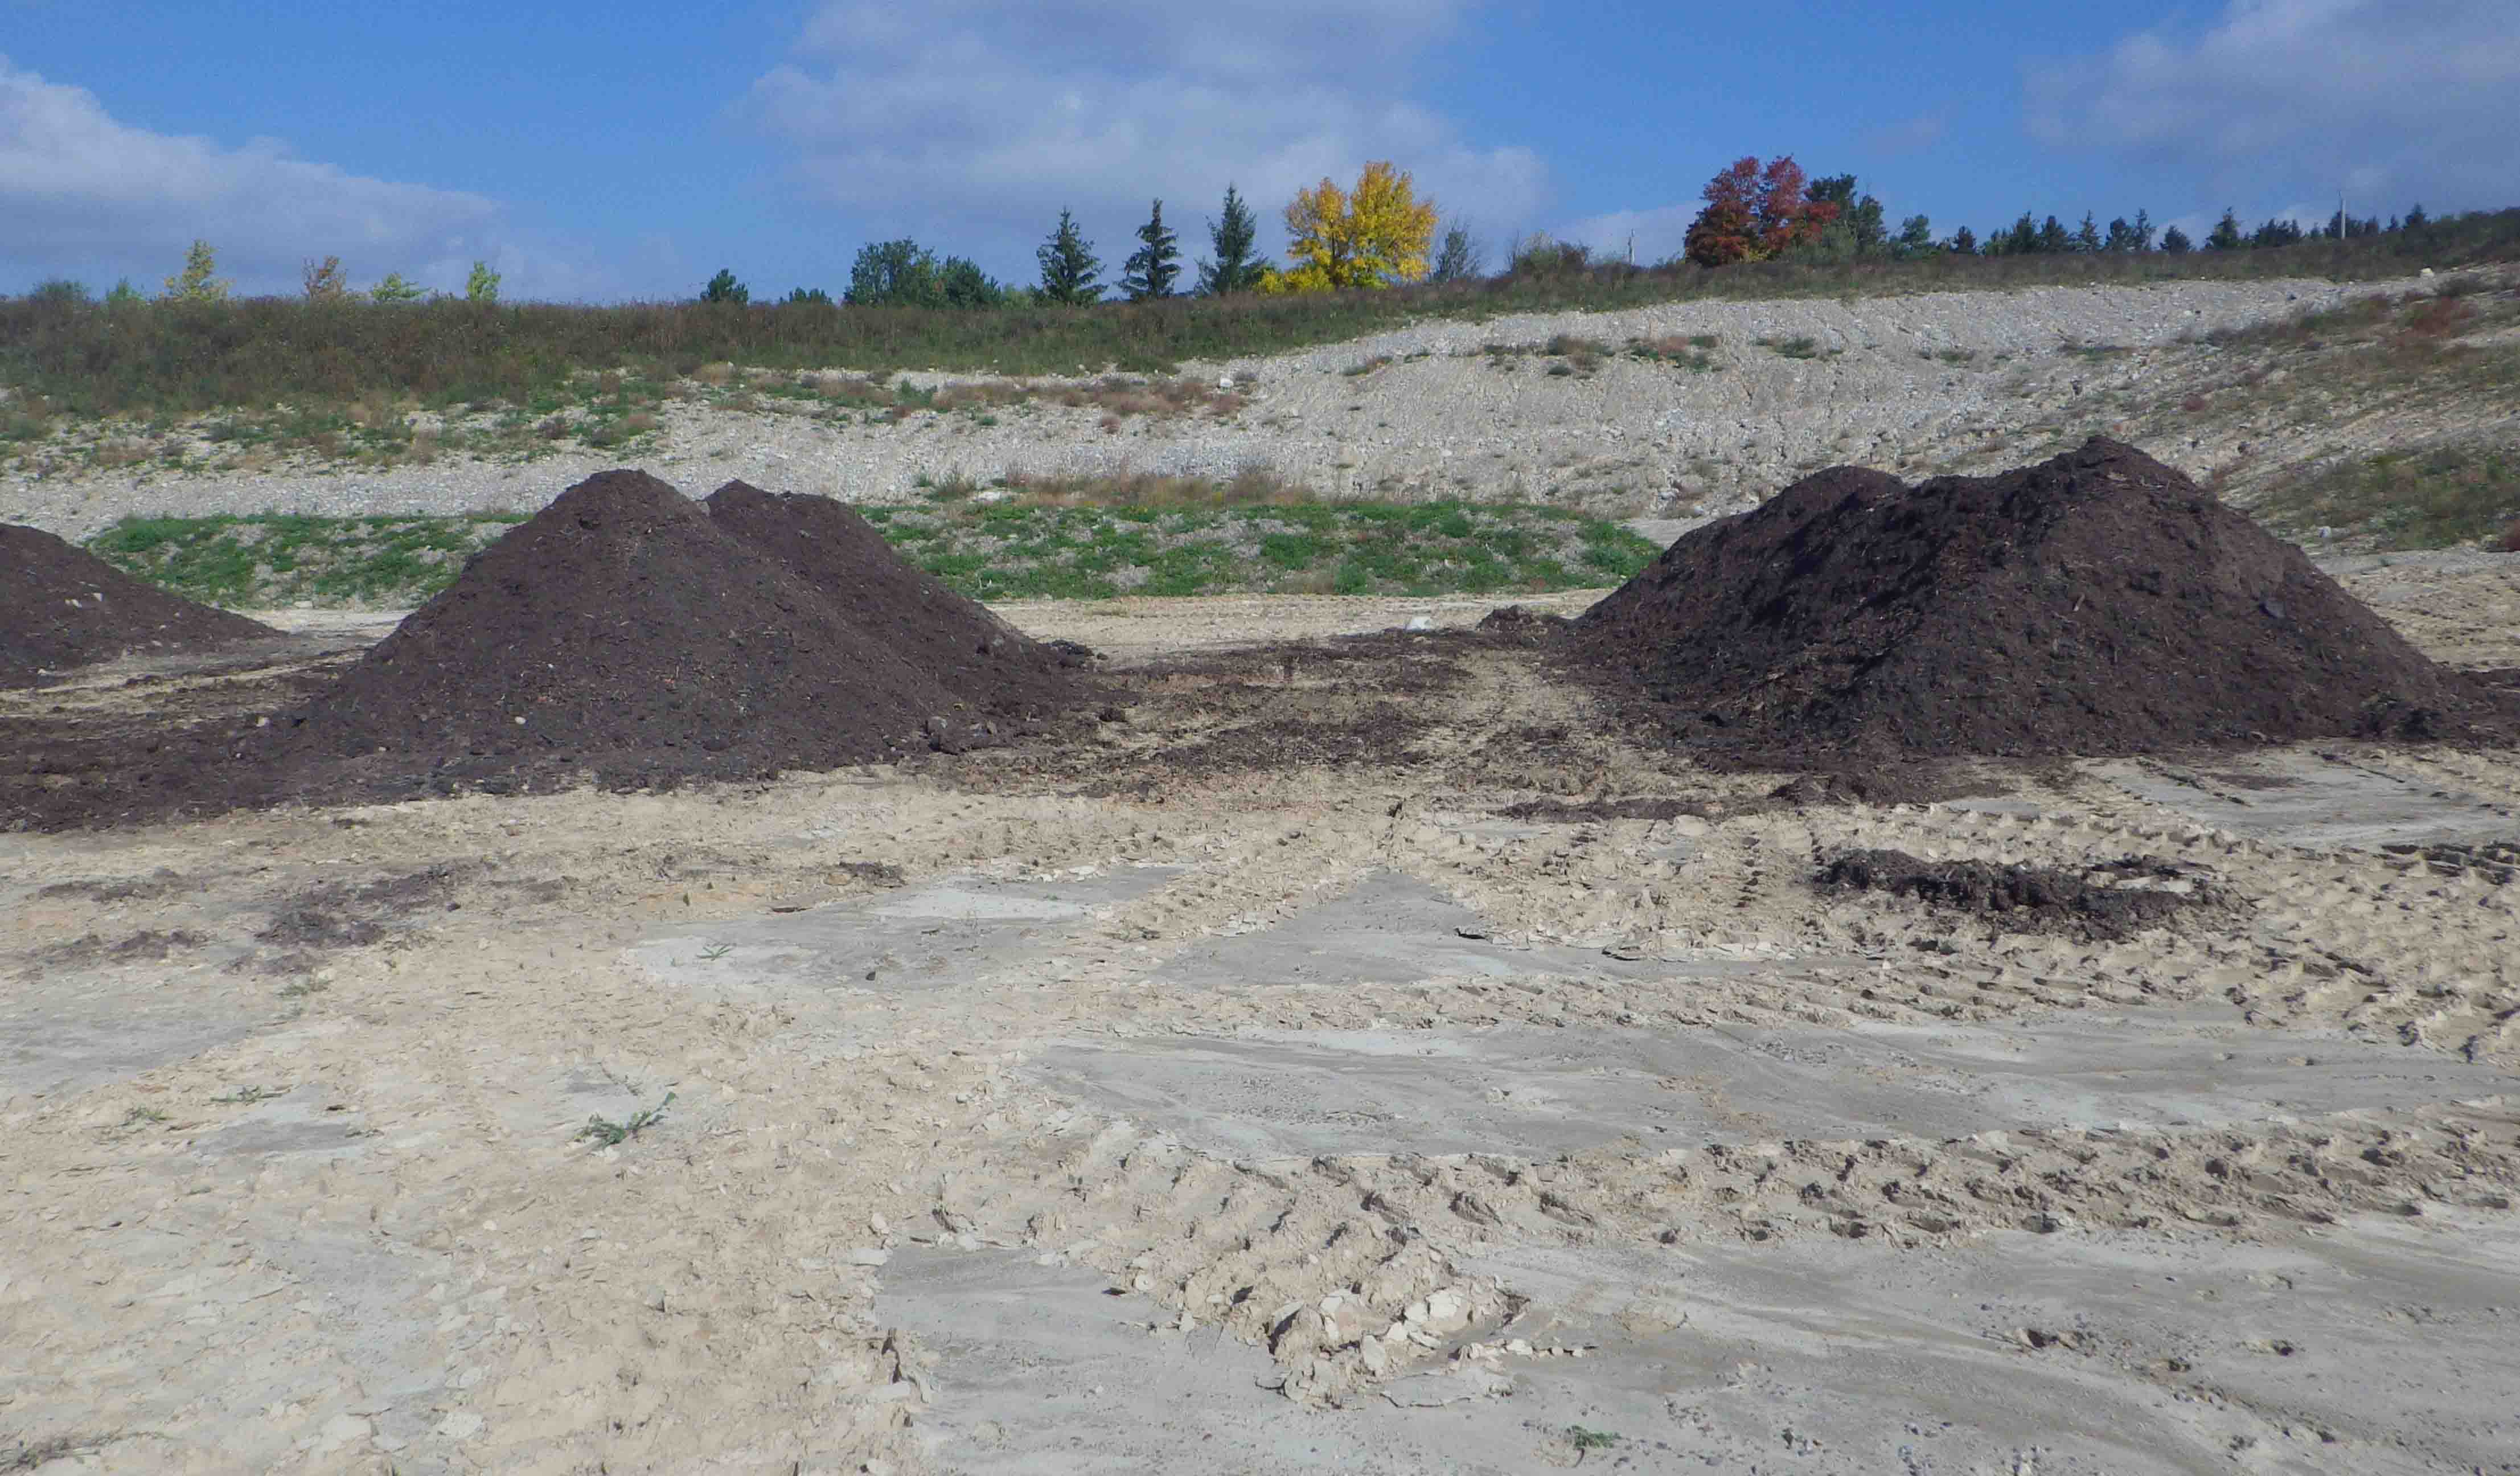 Ontario’s new excess soils regulation: What do infrastructure owners need to know?